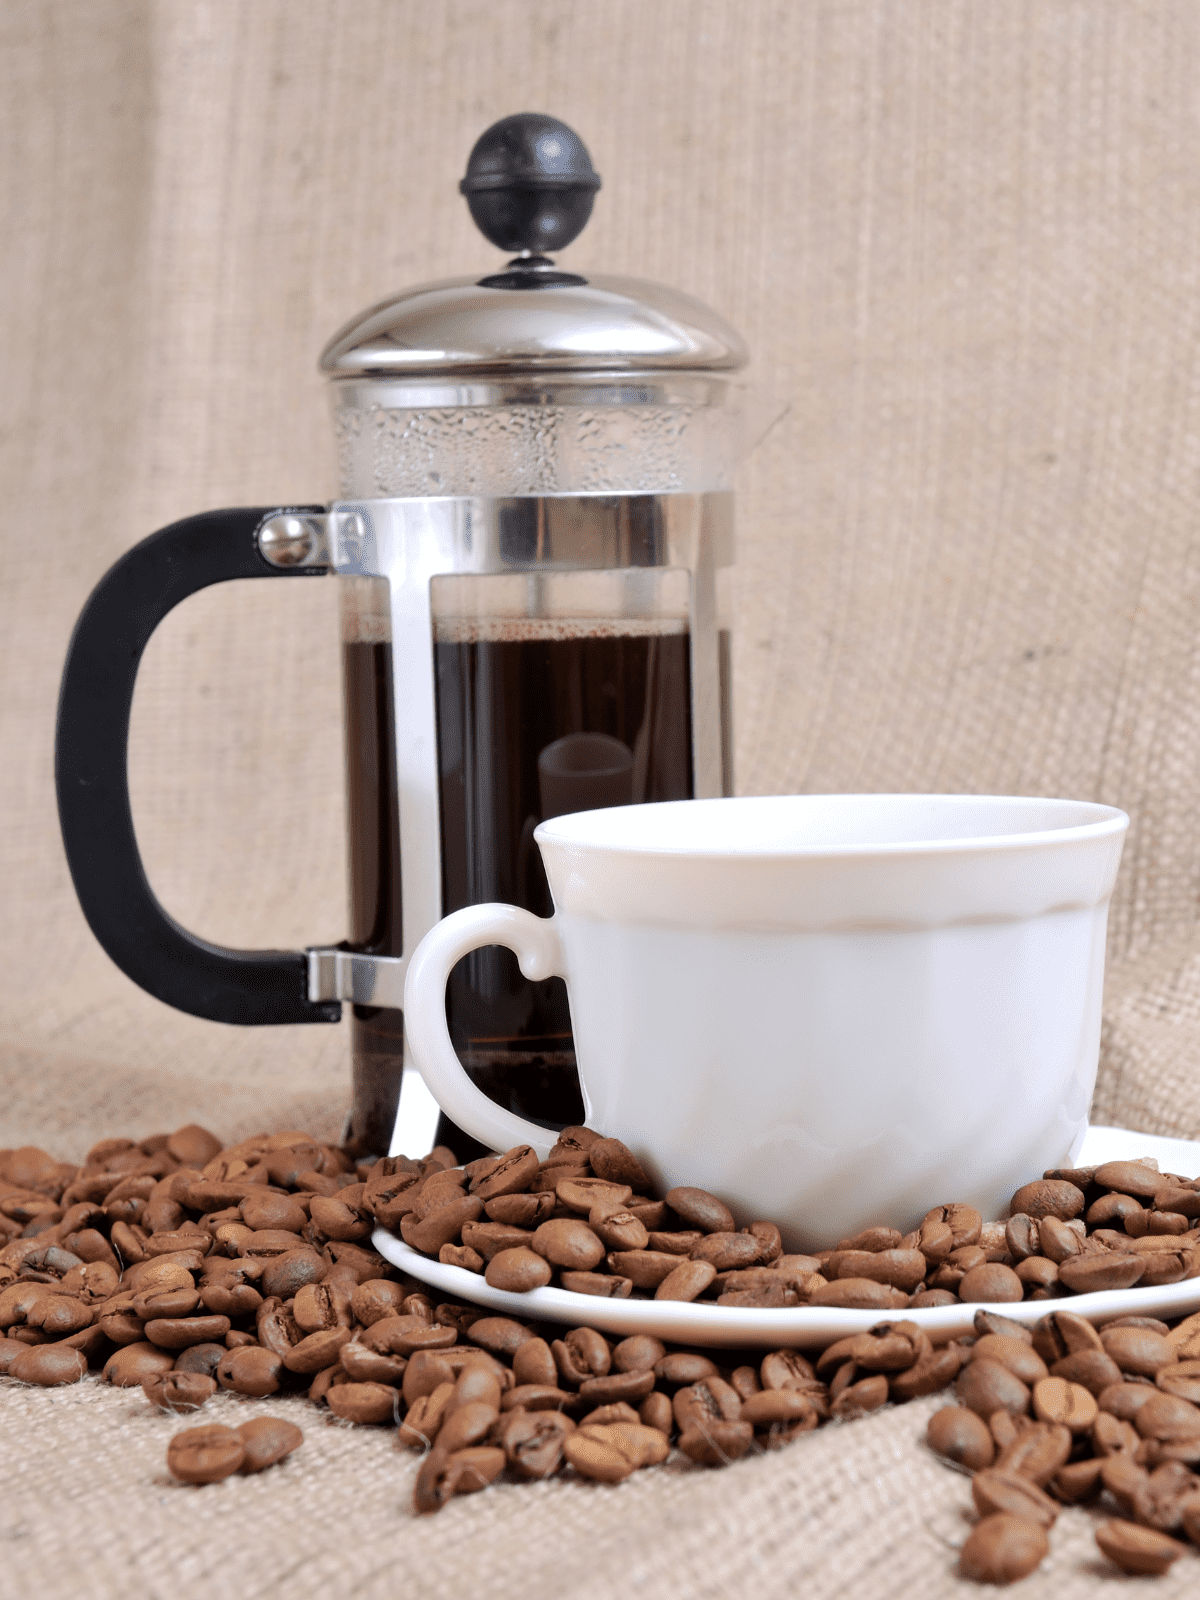 Best Coffee Grinders for French Press French press and a cup of coffee with beans on the table.